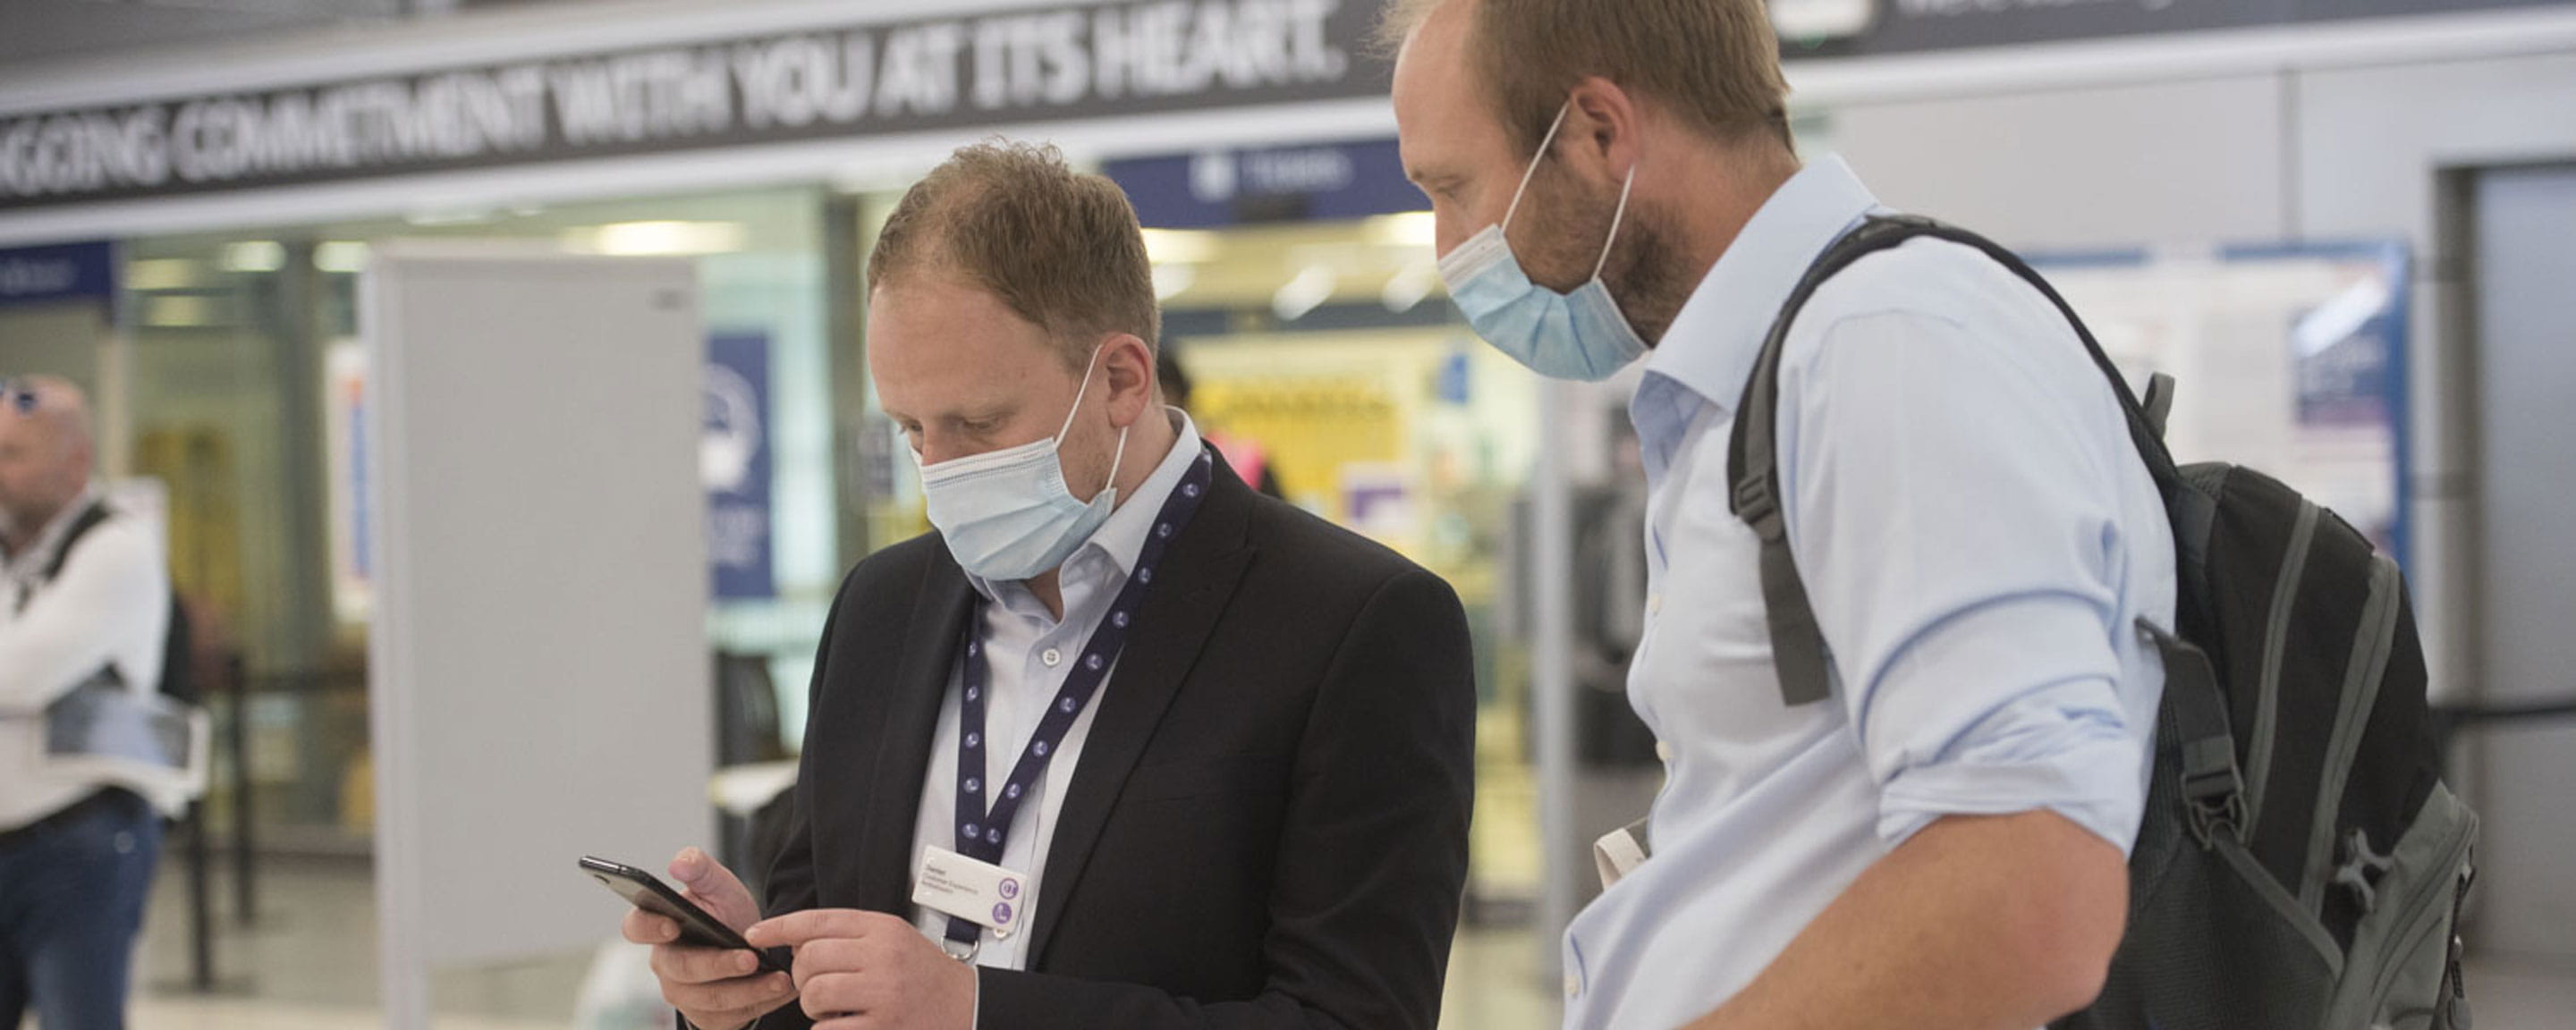 Two men wearing face masks checking a mobile phone